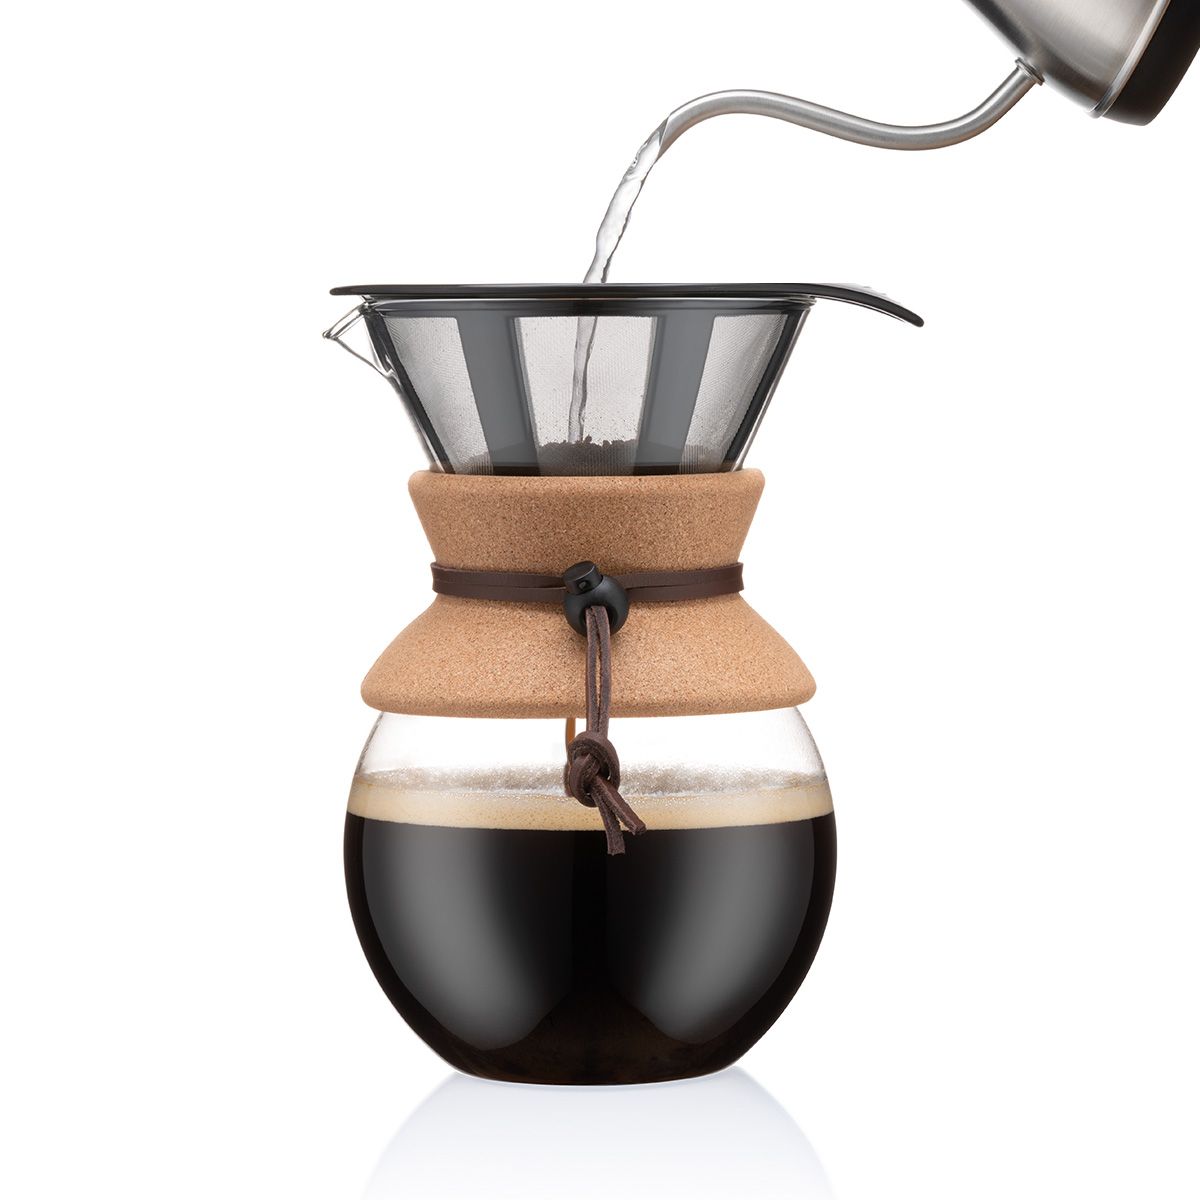 Filter Coffee Maker POUR OVER 1.0 L